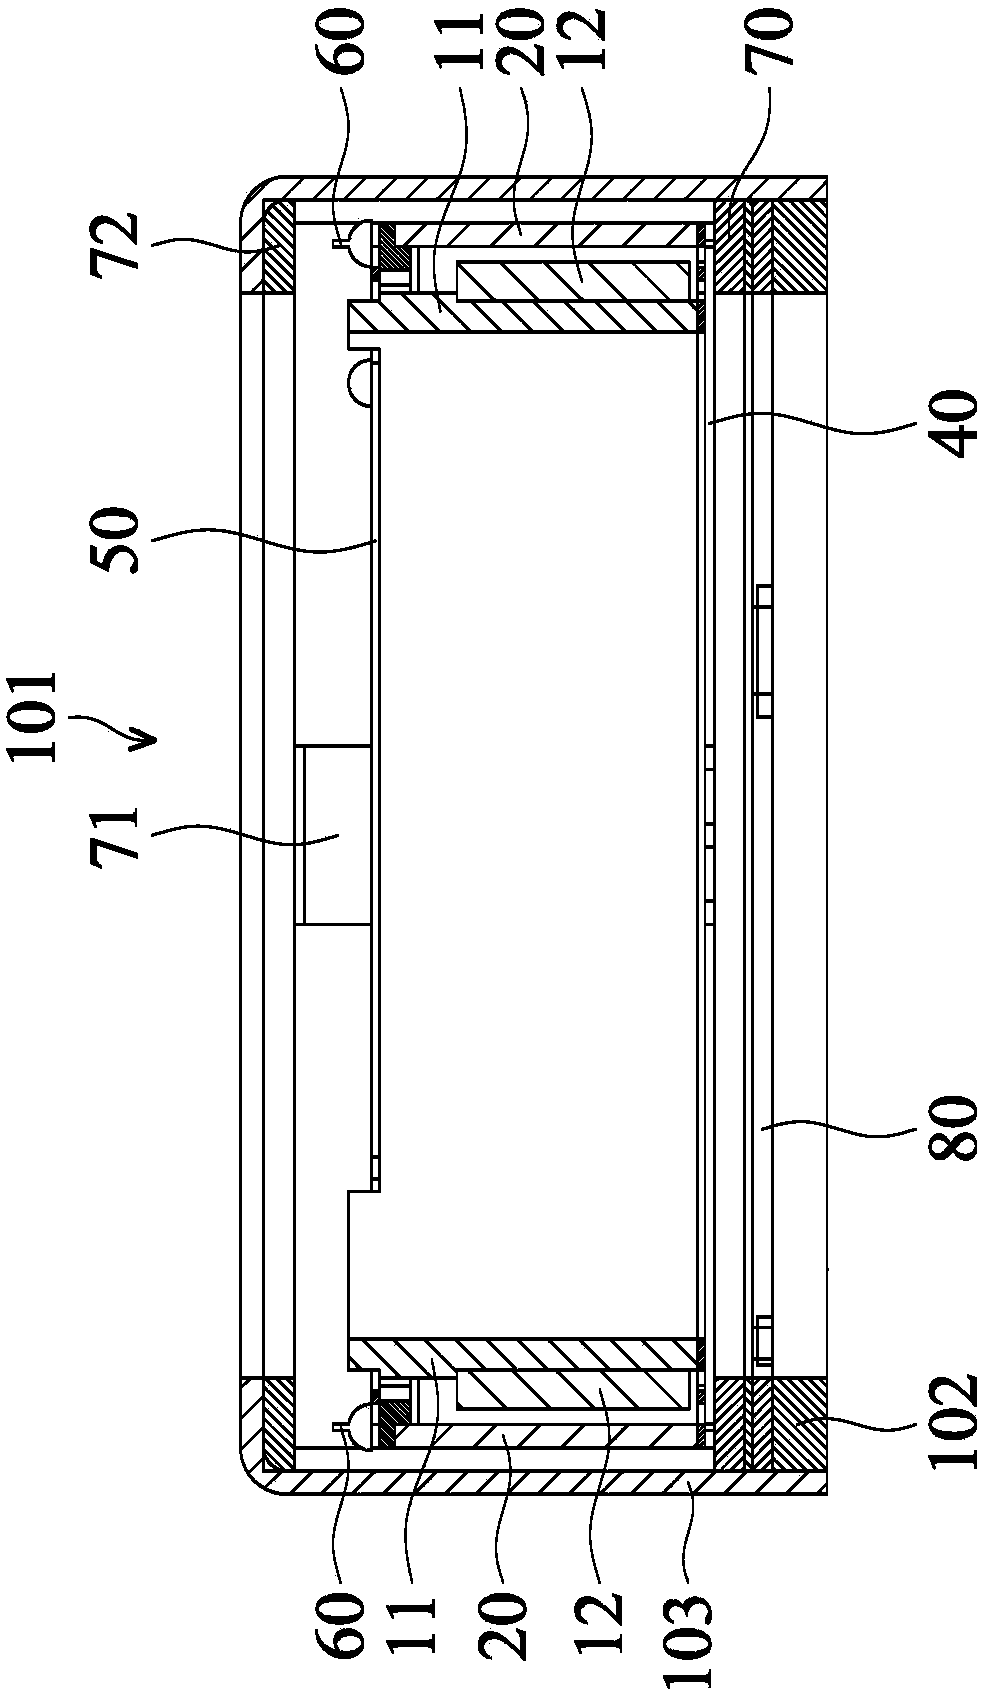 Integrated structure of auto focus and optical image stabilizer mechanisms